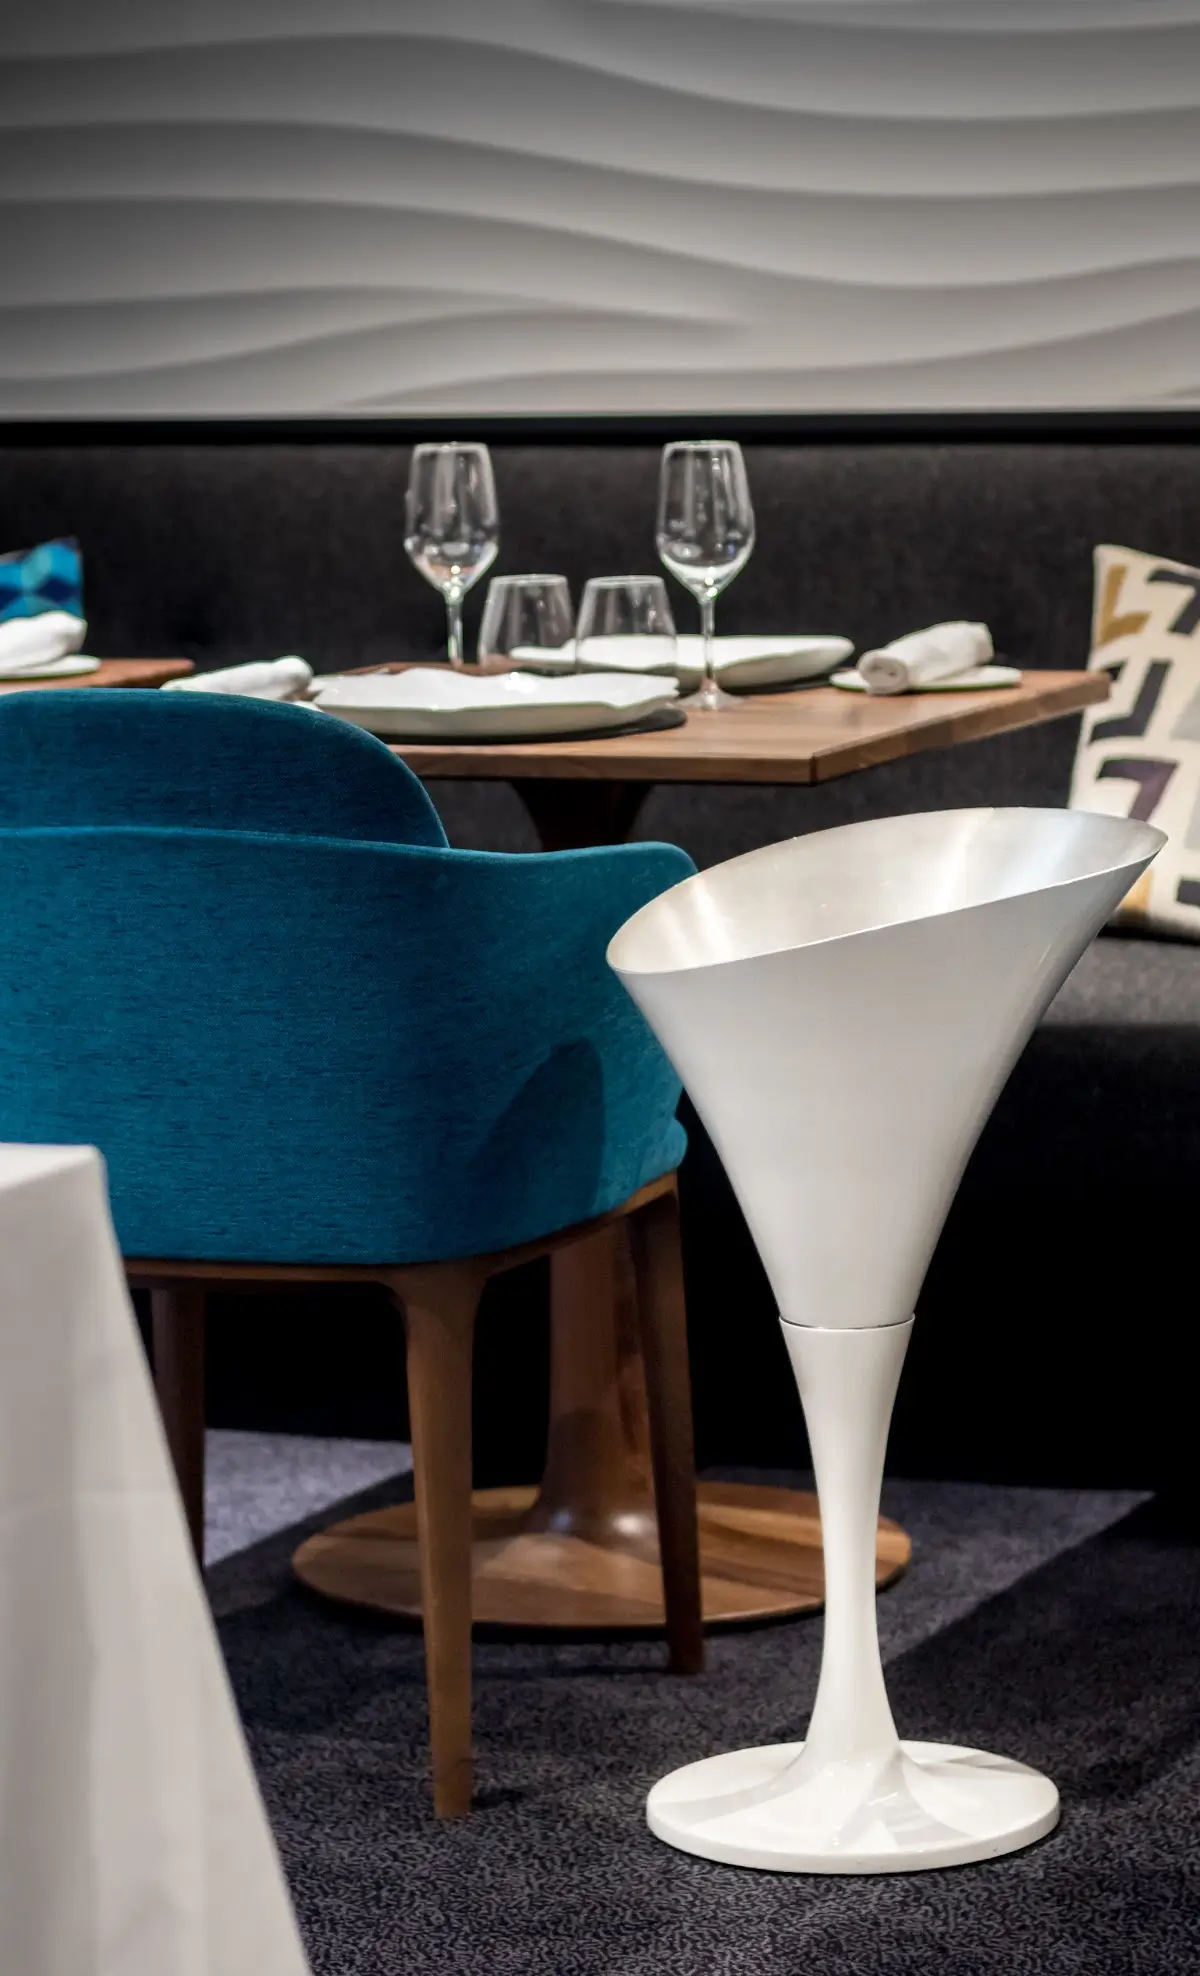 Table setting with blue chairs at Auguste, a Michelin Star restaurant in Paris.